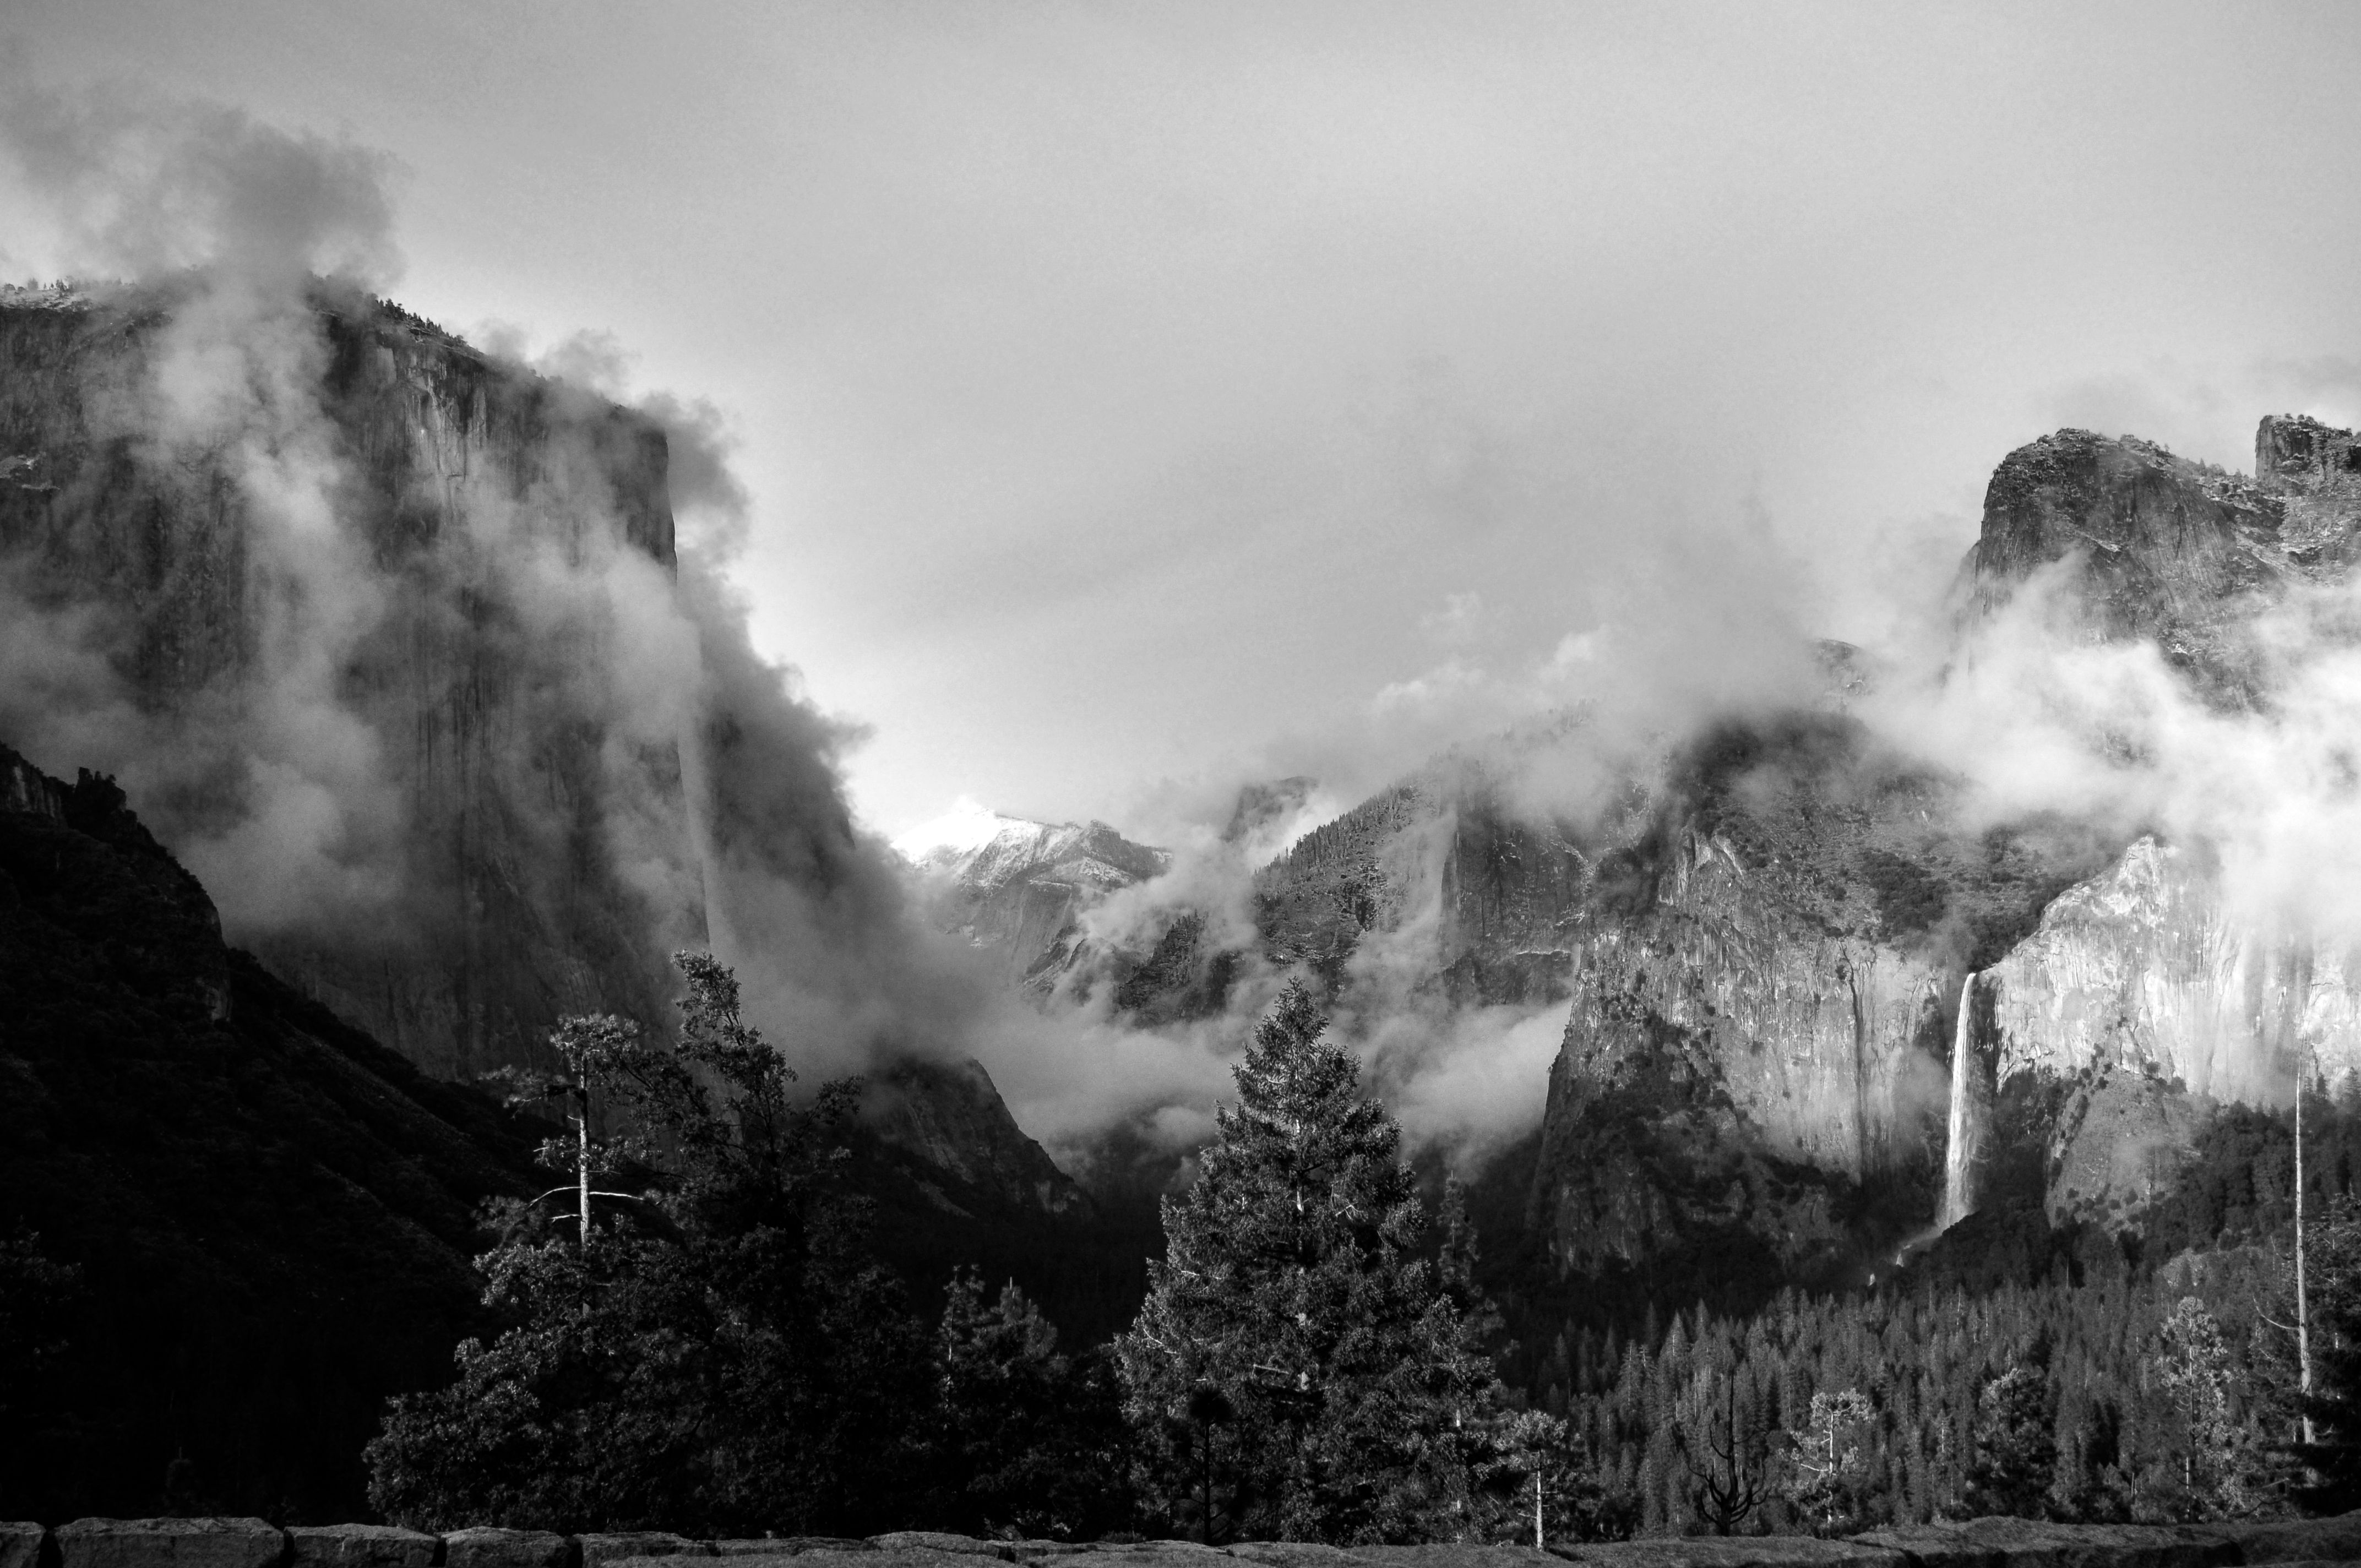 Winter Storm Clearing over Yosemite Valley